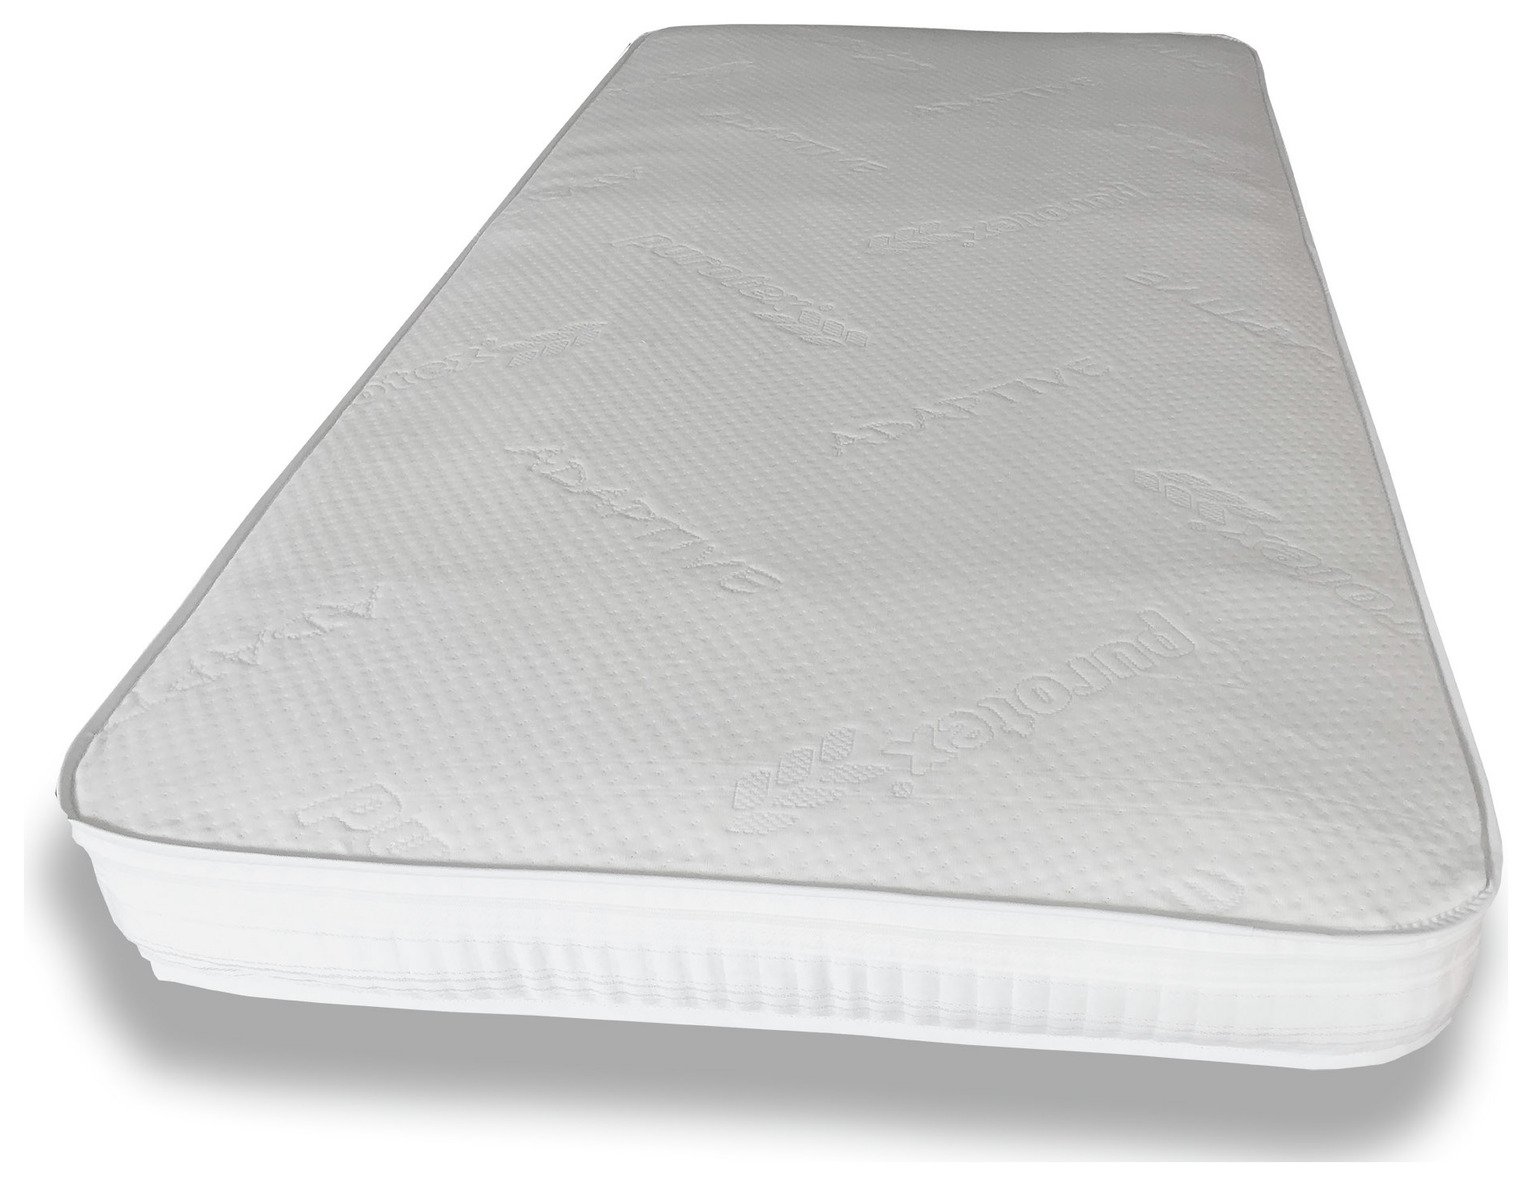 Cuggl 140 x 70cm Thermo Pocket Sprung Cot Bed Mattress Review